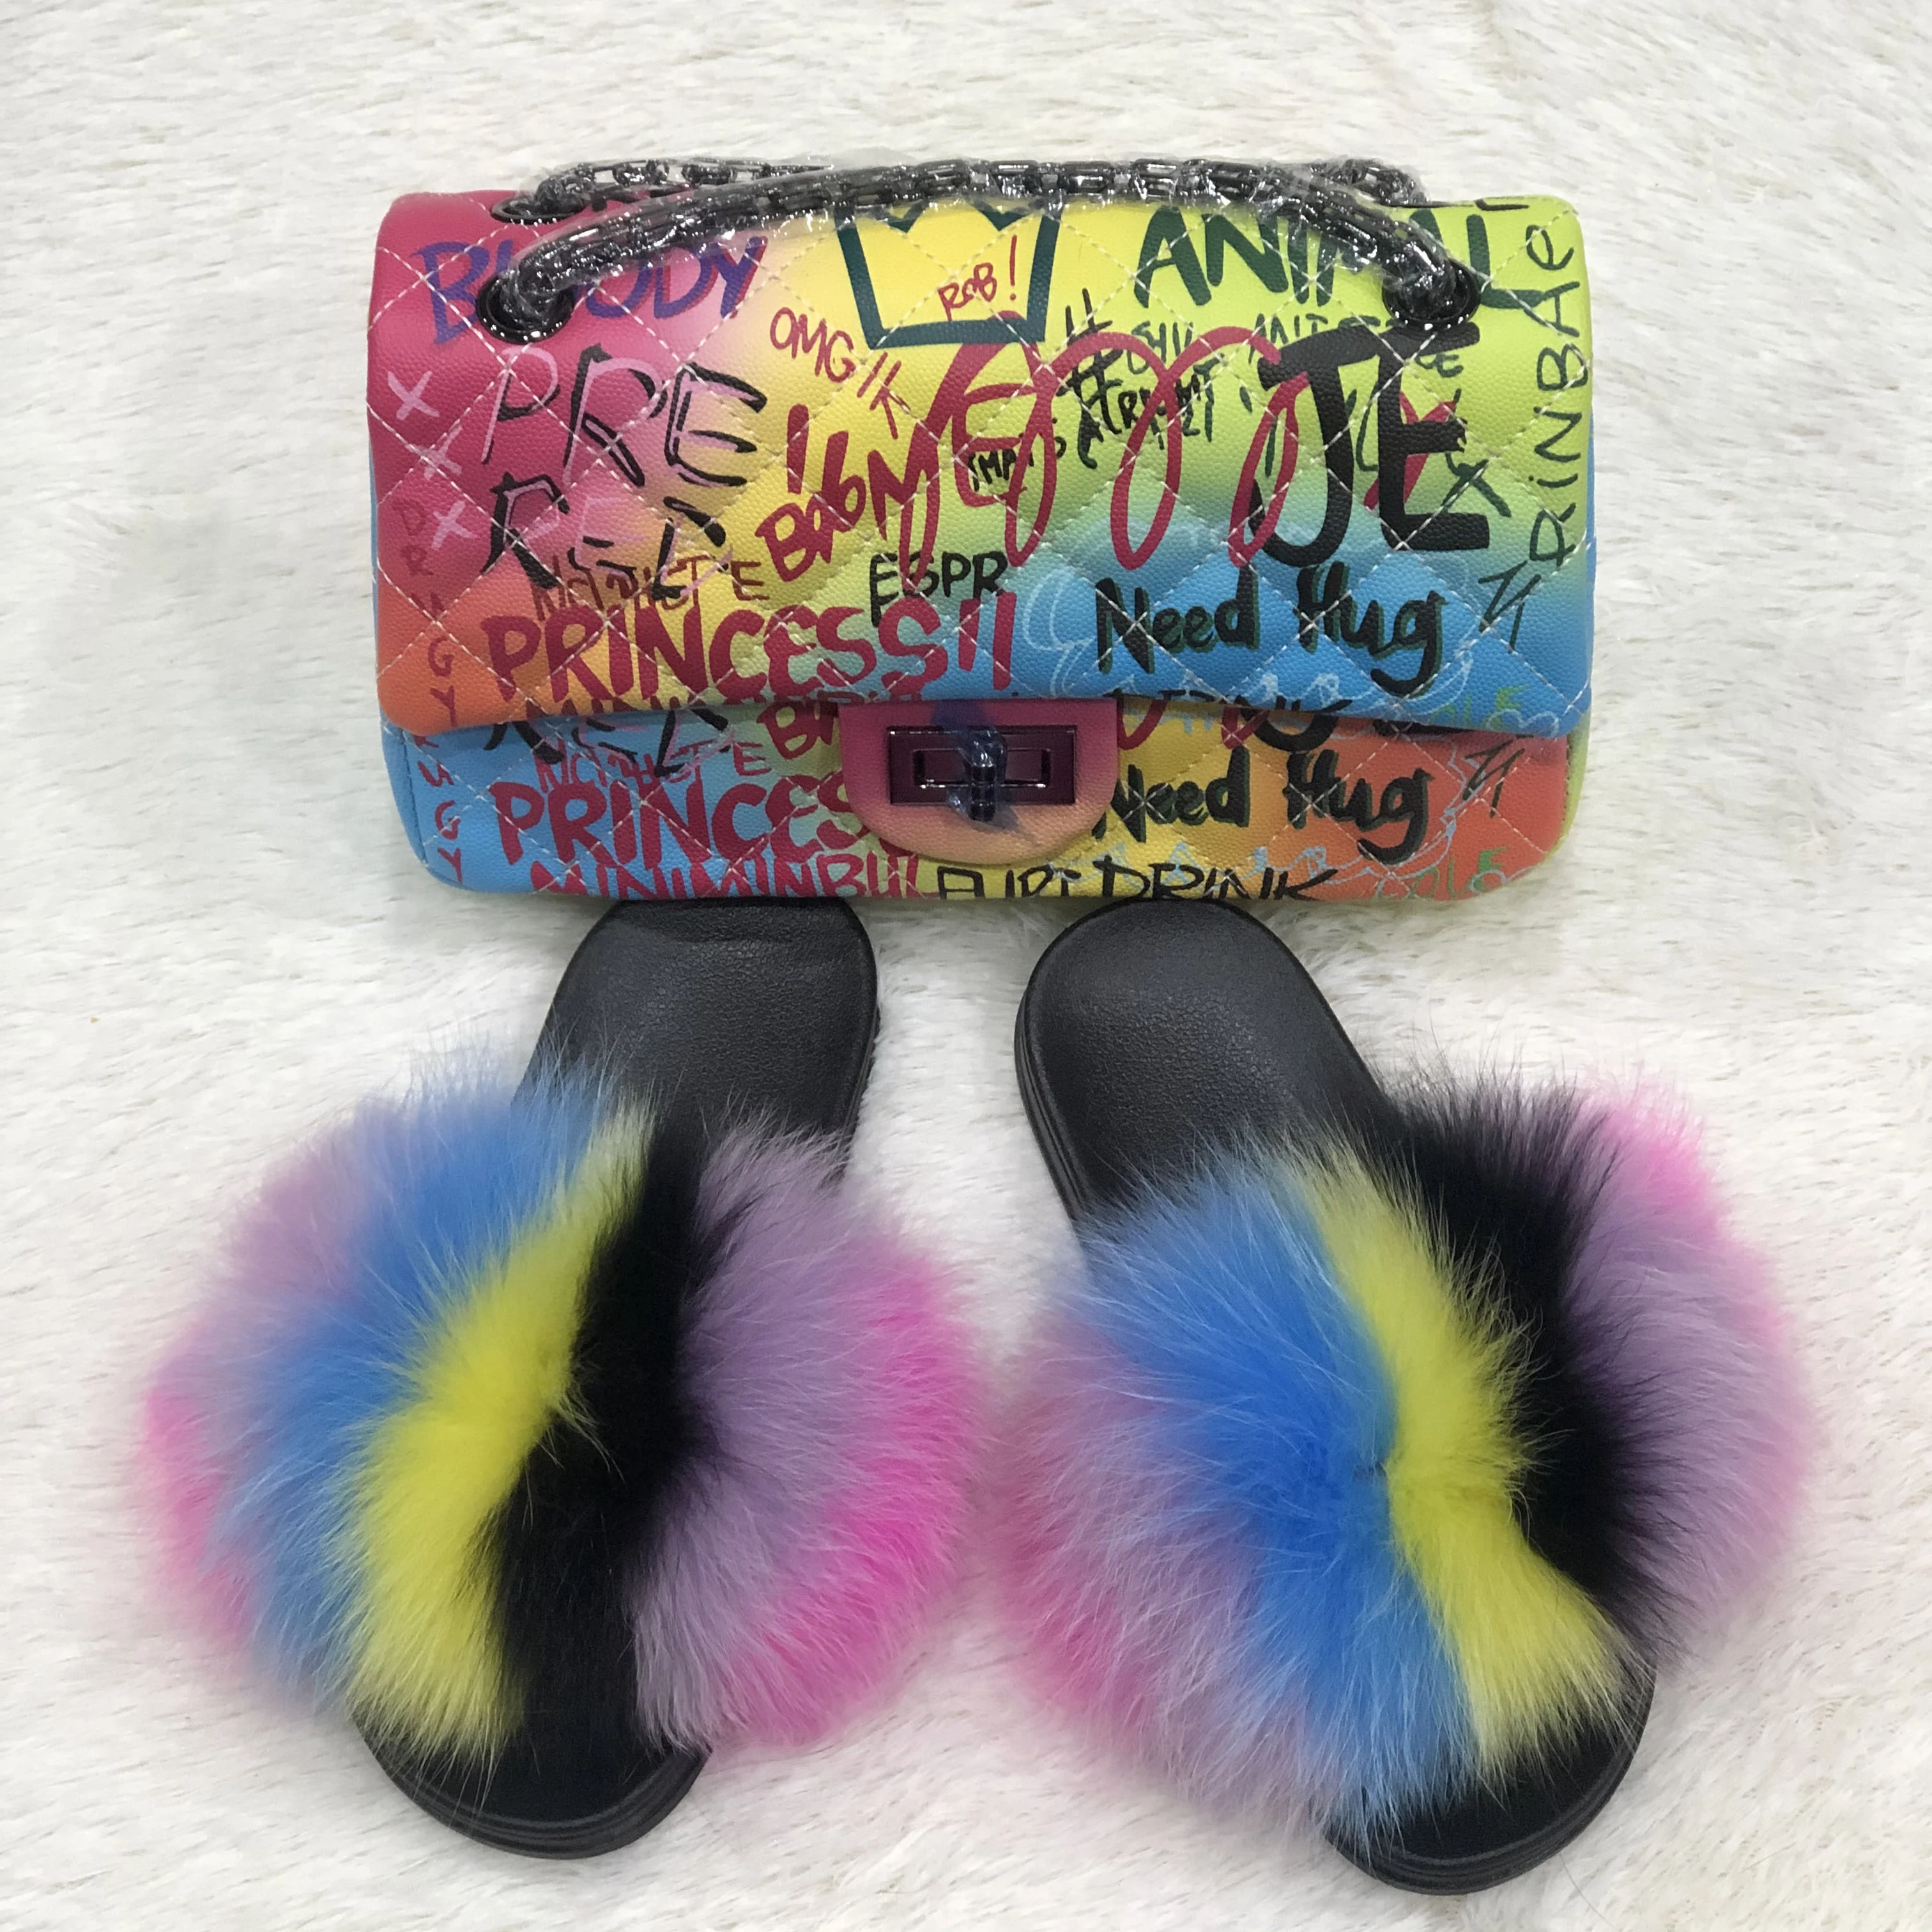 

Wholesale Fur Slippers Purse Sets Custom Colorful Real Raccoon Fur Sandals Fanny Pack Jelly Bag Fox Fur Slides For Women, As picture show or customized